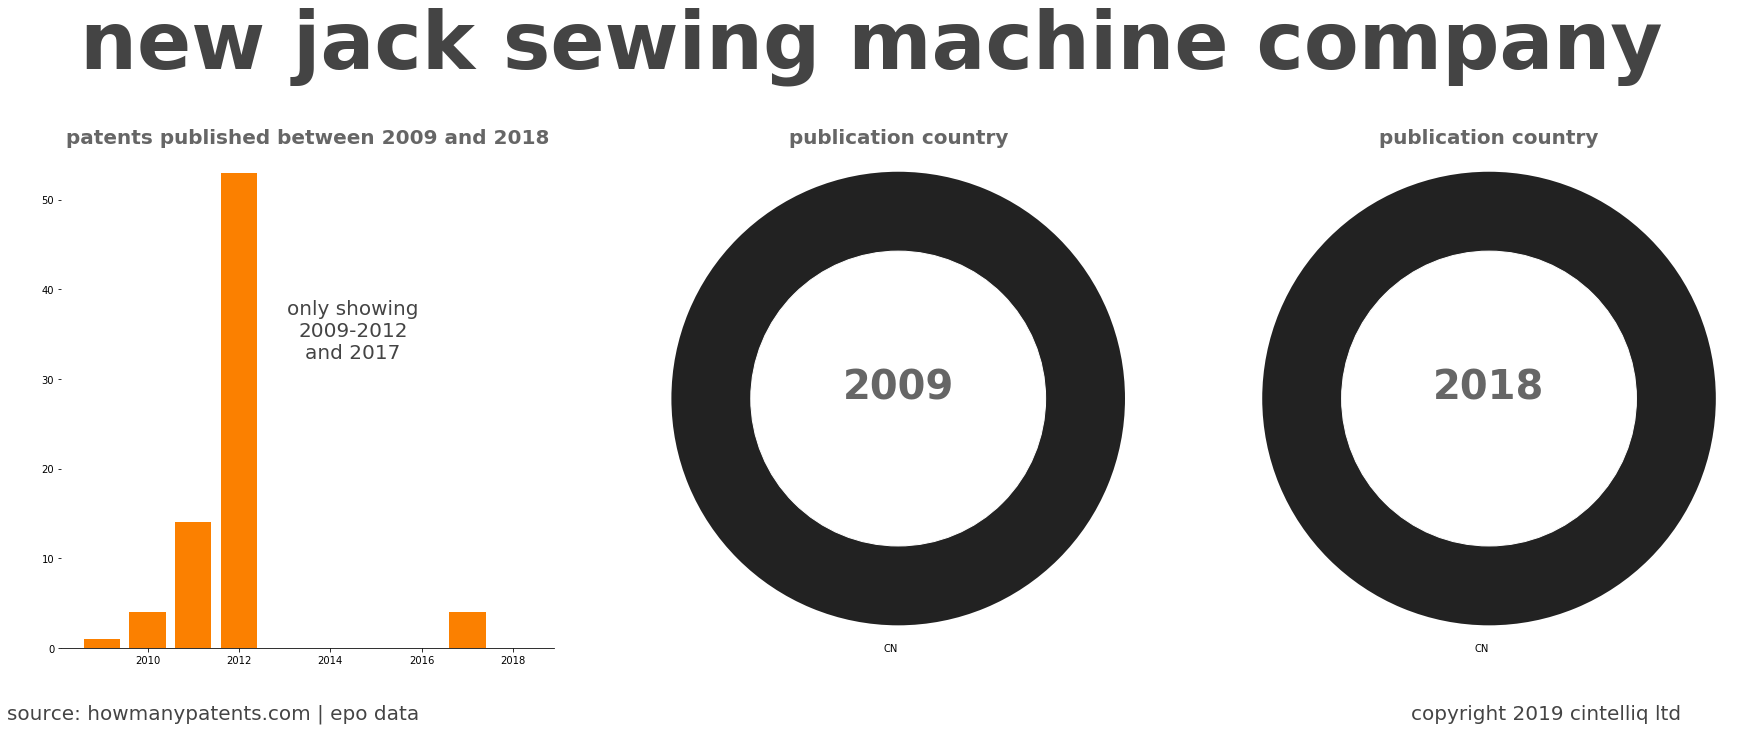 summary of patents for New Jack Sewing Machine Company